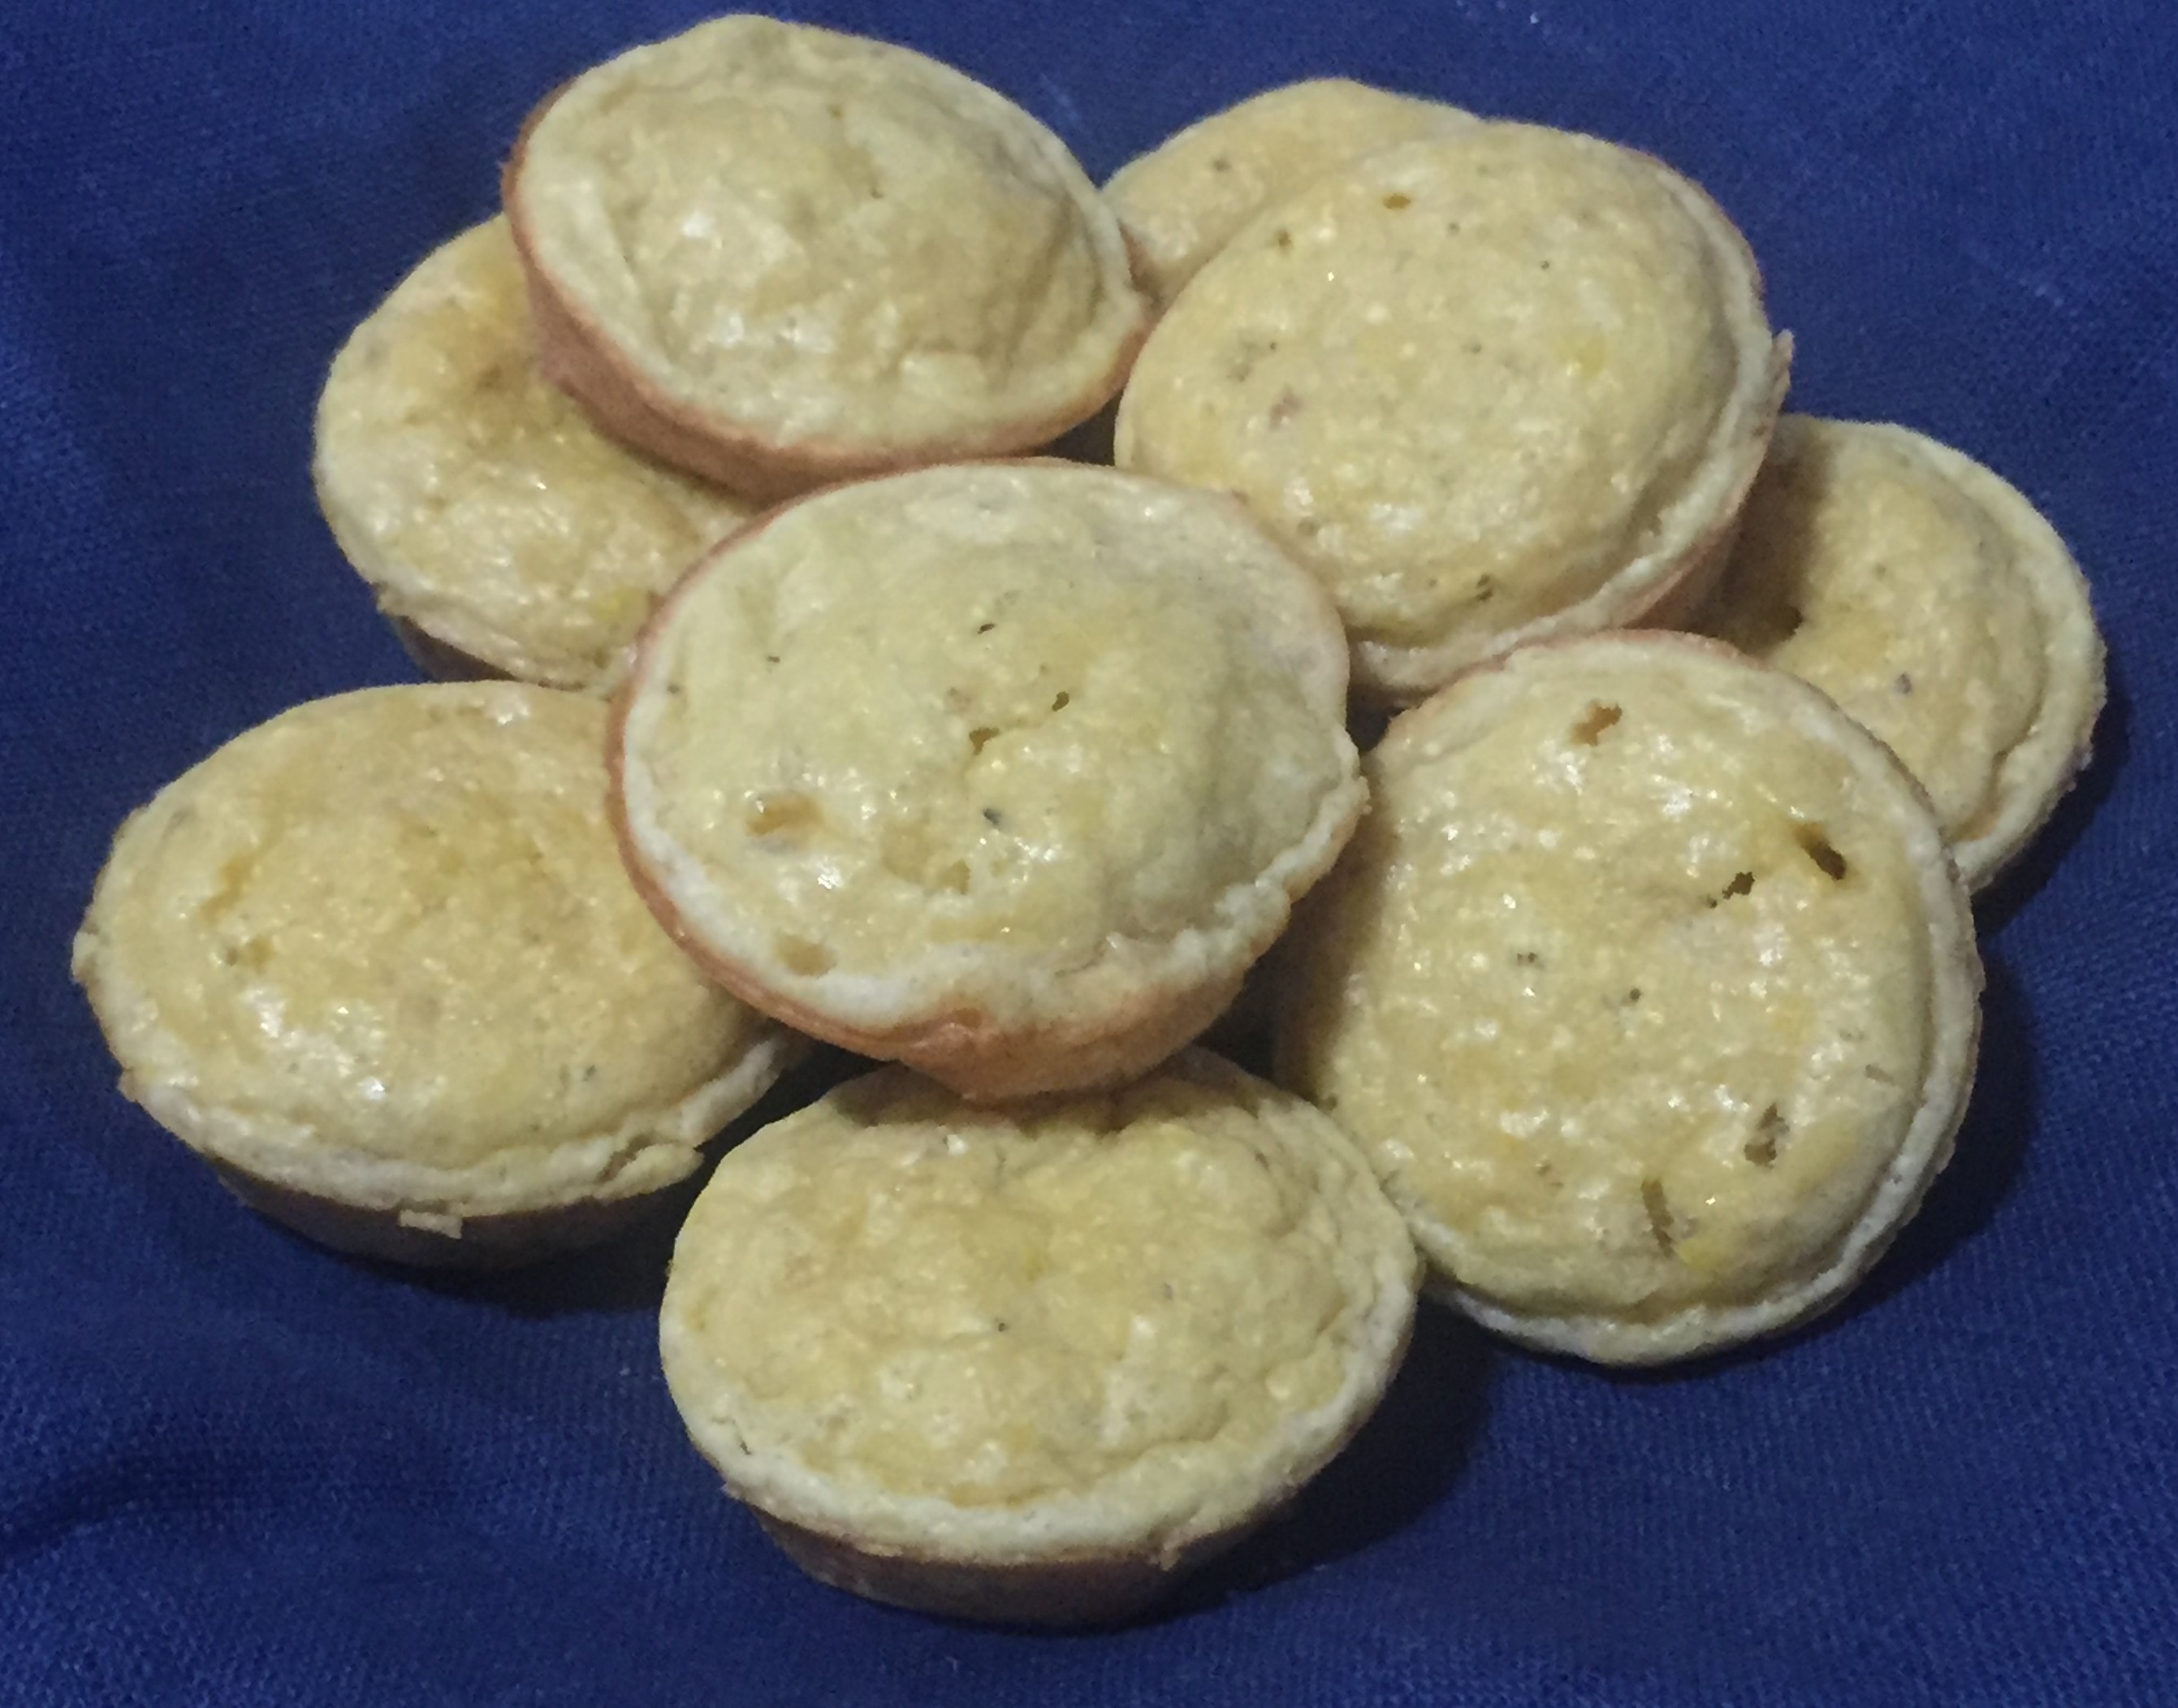 Nine small corn muffins clustered together on a navy blue linen napkin.